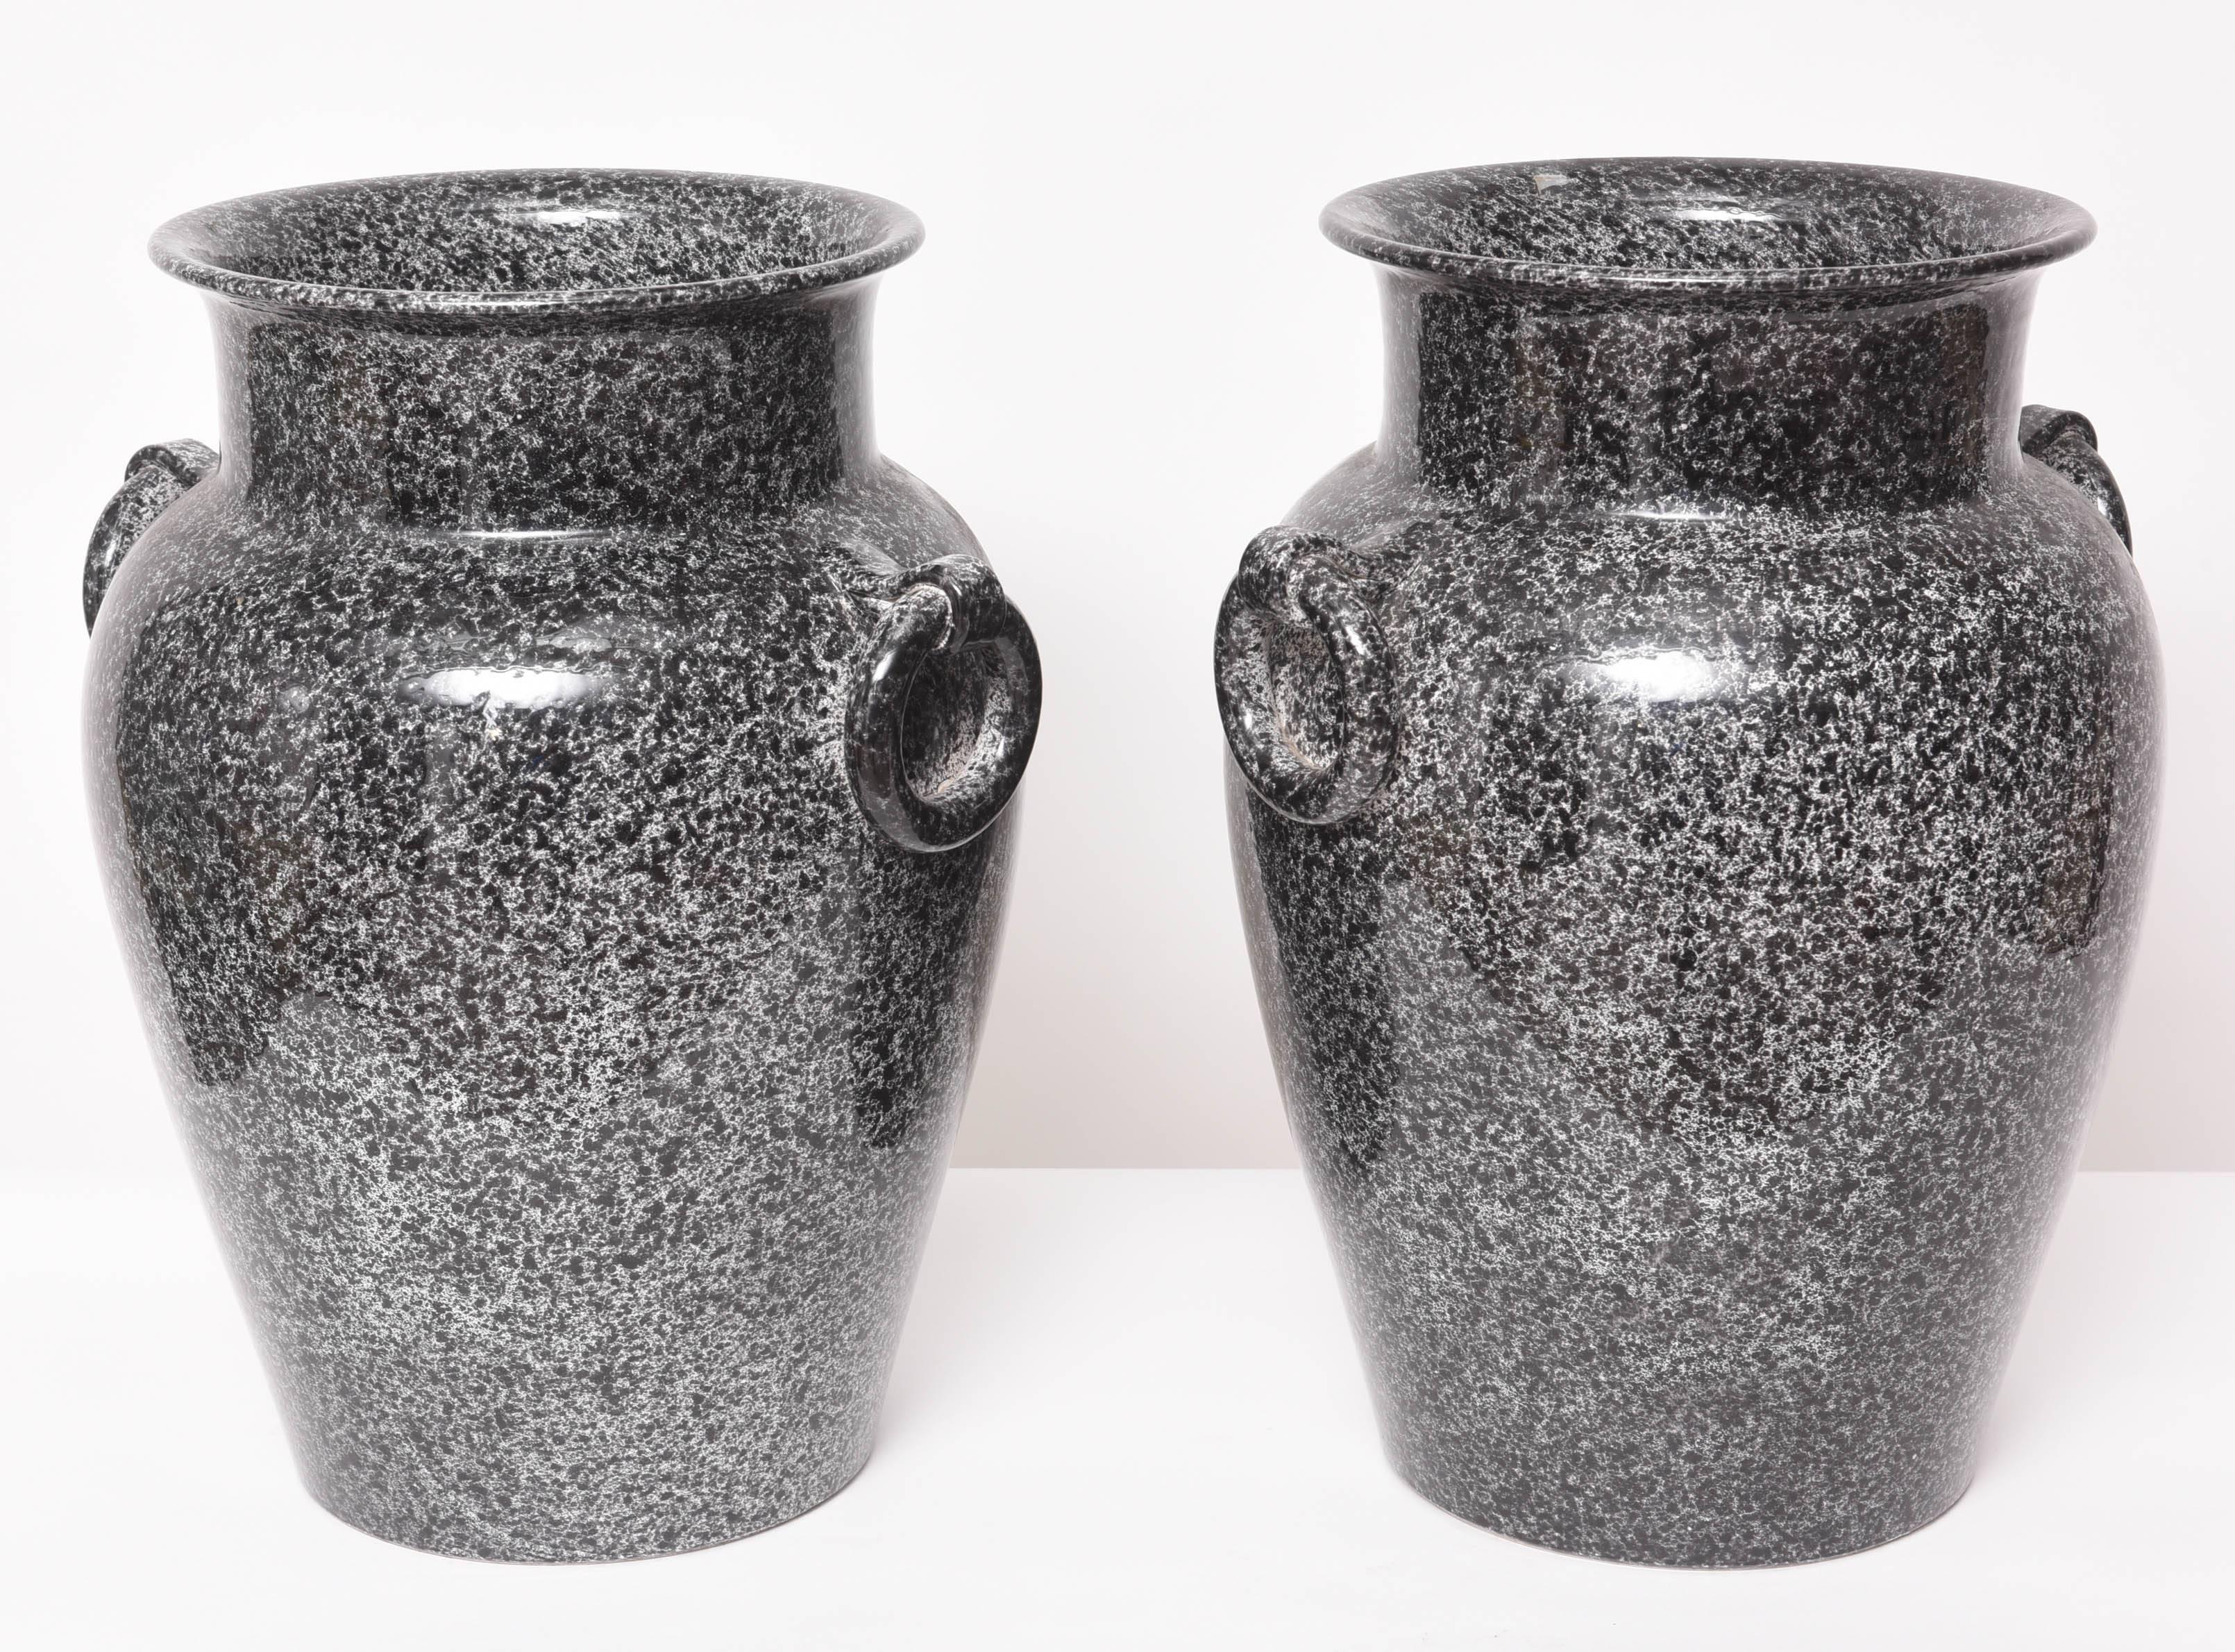 This pair of glazed pottery urns are in a mottled black and gray coloration which resembles porphyry marble.

Note:  They do have a hole in the bottom for drainage or to be made into a lamp.
 
For best net trade price or additional questions